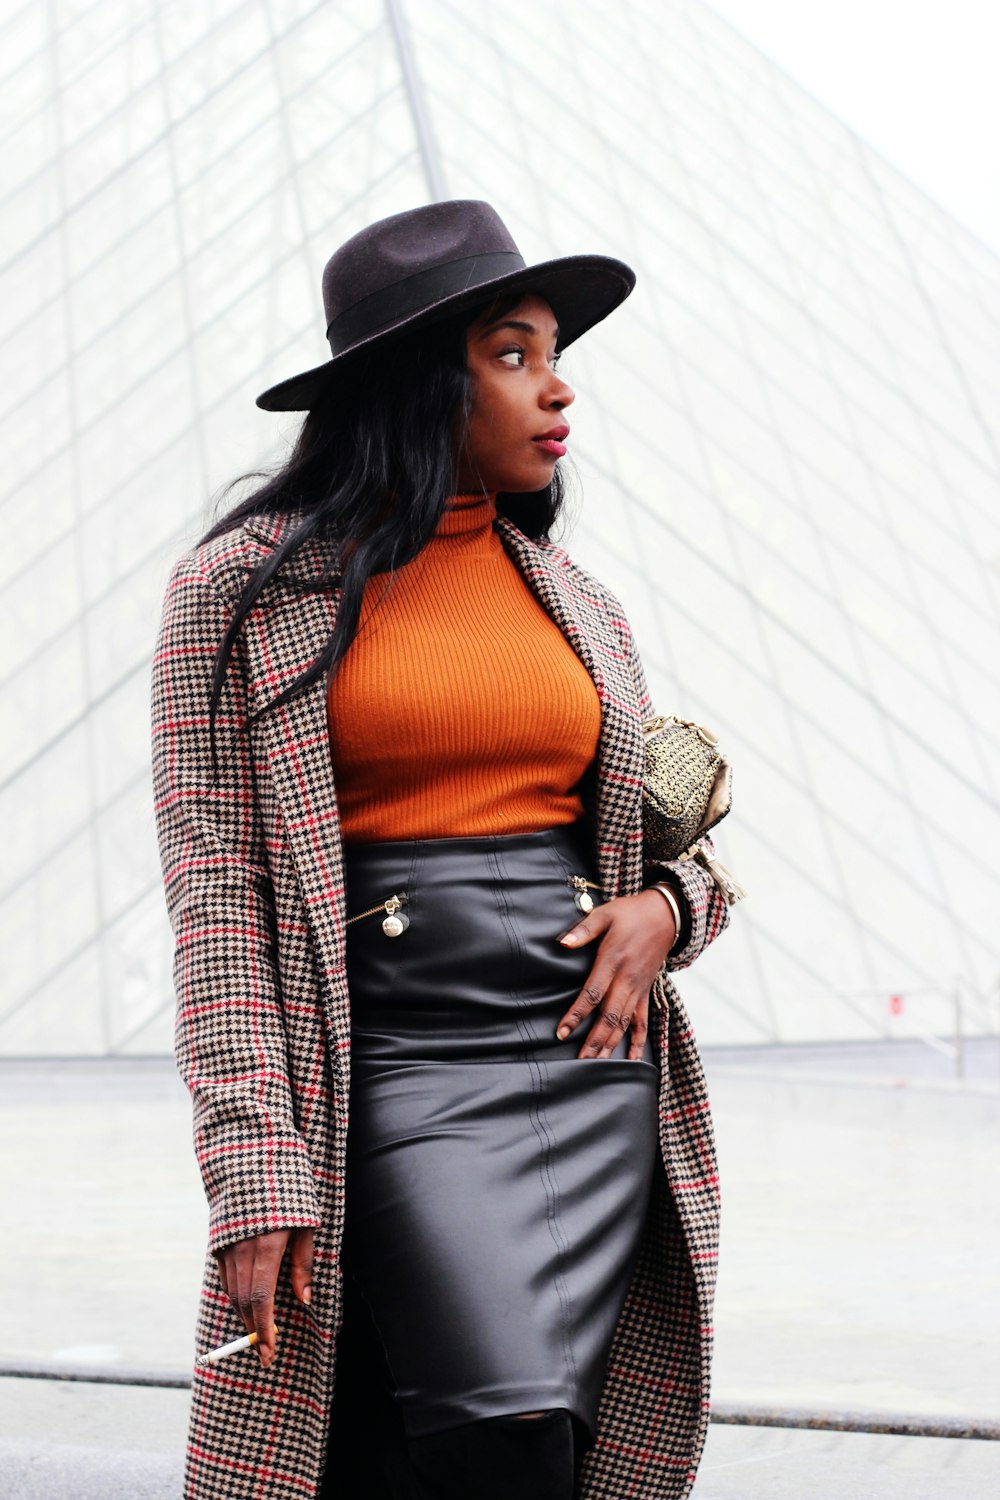 woman wearing orange sweater and black leather skirt with beige trench caot  standing on street looking at side photo – Free Clothing Image on Unsplash